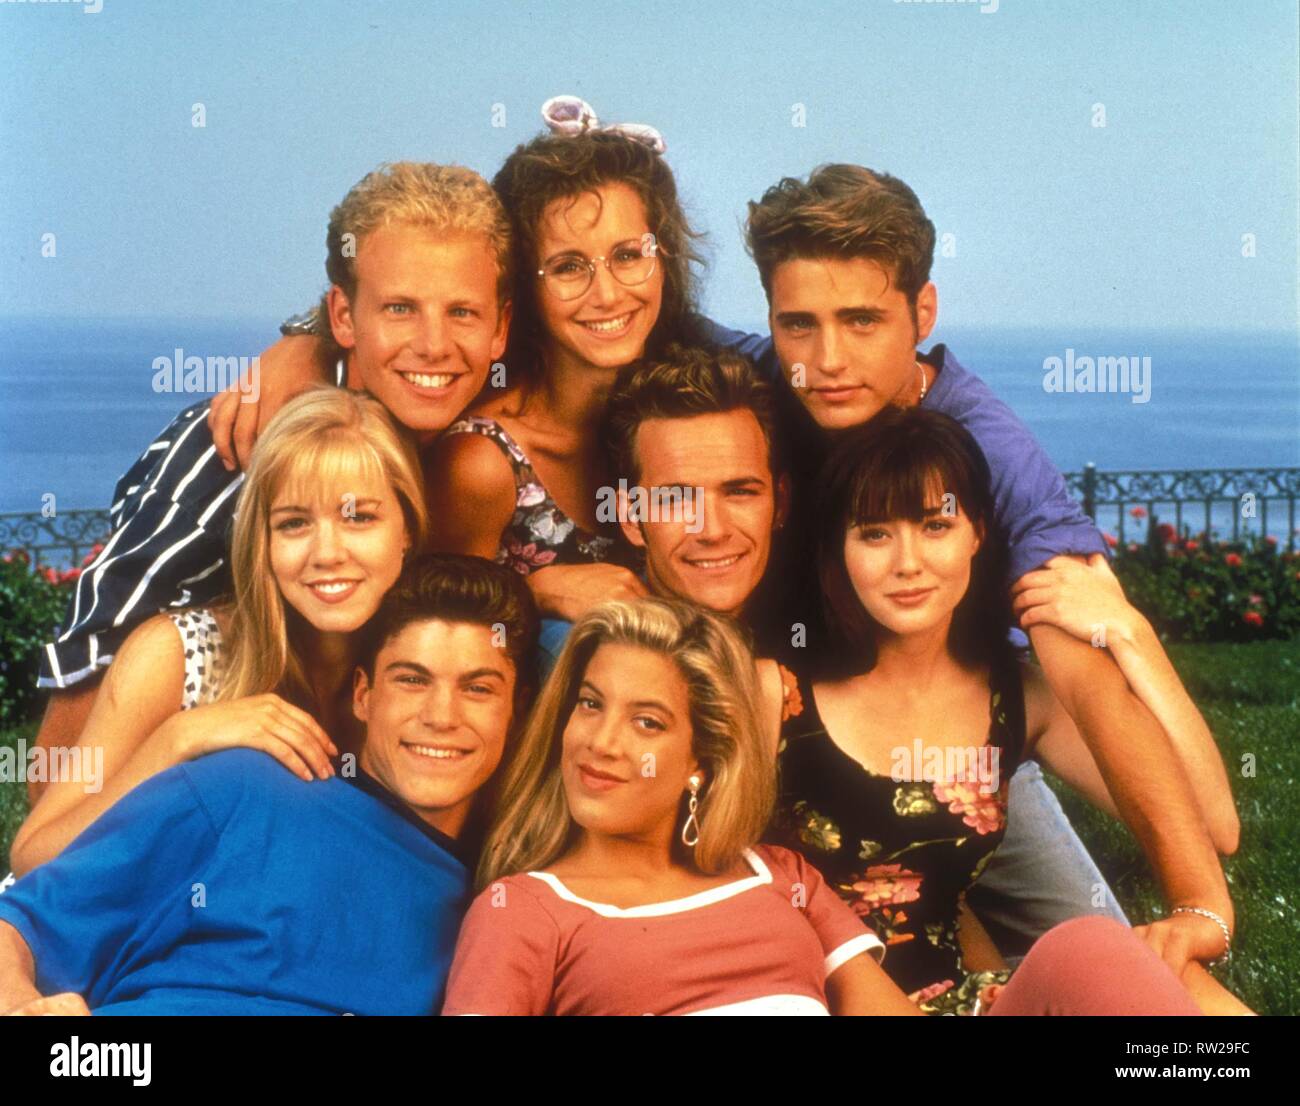 Actor LUKE PERRY (11 October 1966 - 4 March 2019) best known for his roles on TV shows 'Beverly Hills 90210' and 'Riverdale', died on Monday at the age of 52 after suffering a massive stroke last week. PICTURED: 'Beverly Hills 90210' cast photo: LUKE PERRY, JASON PRIESTLEY, JENNY GARTH, SHANNON DOHERTY, BRIAN AUSTIN GREEN, TORI SPELLING, GABRIEL CARTERIS, and IAN ZIERING. (Credit Image: © Globe Photos/ZUMApress.com) Stock Photo